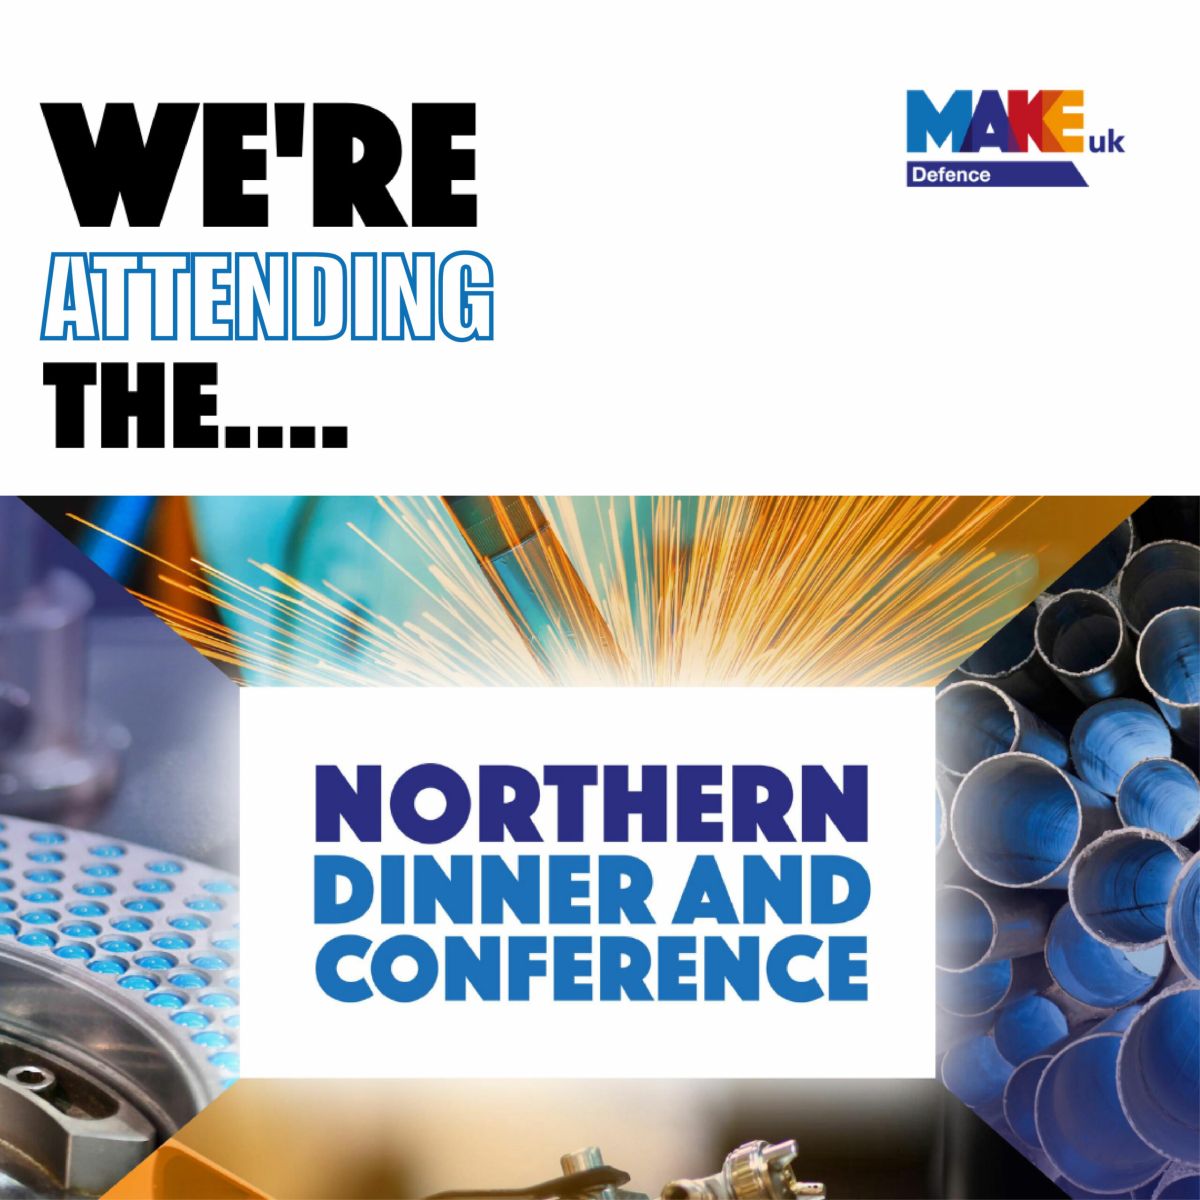 Addition attending Make UK Northern Dinner and Conference 2